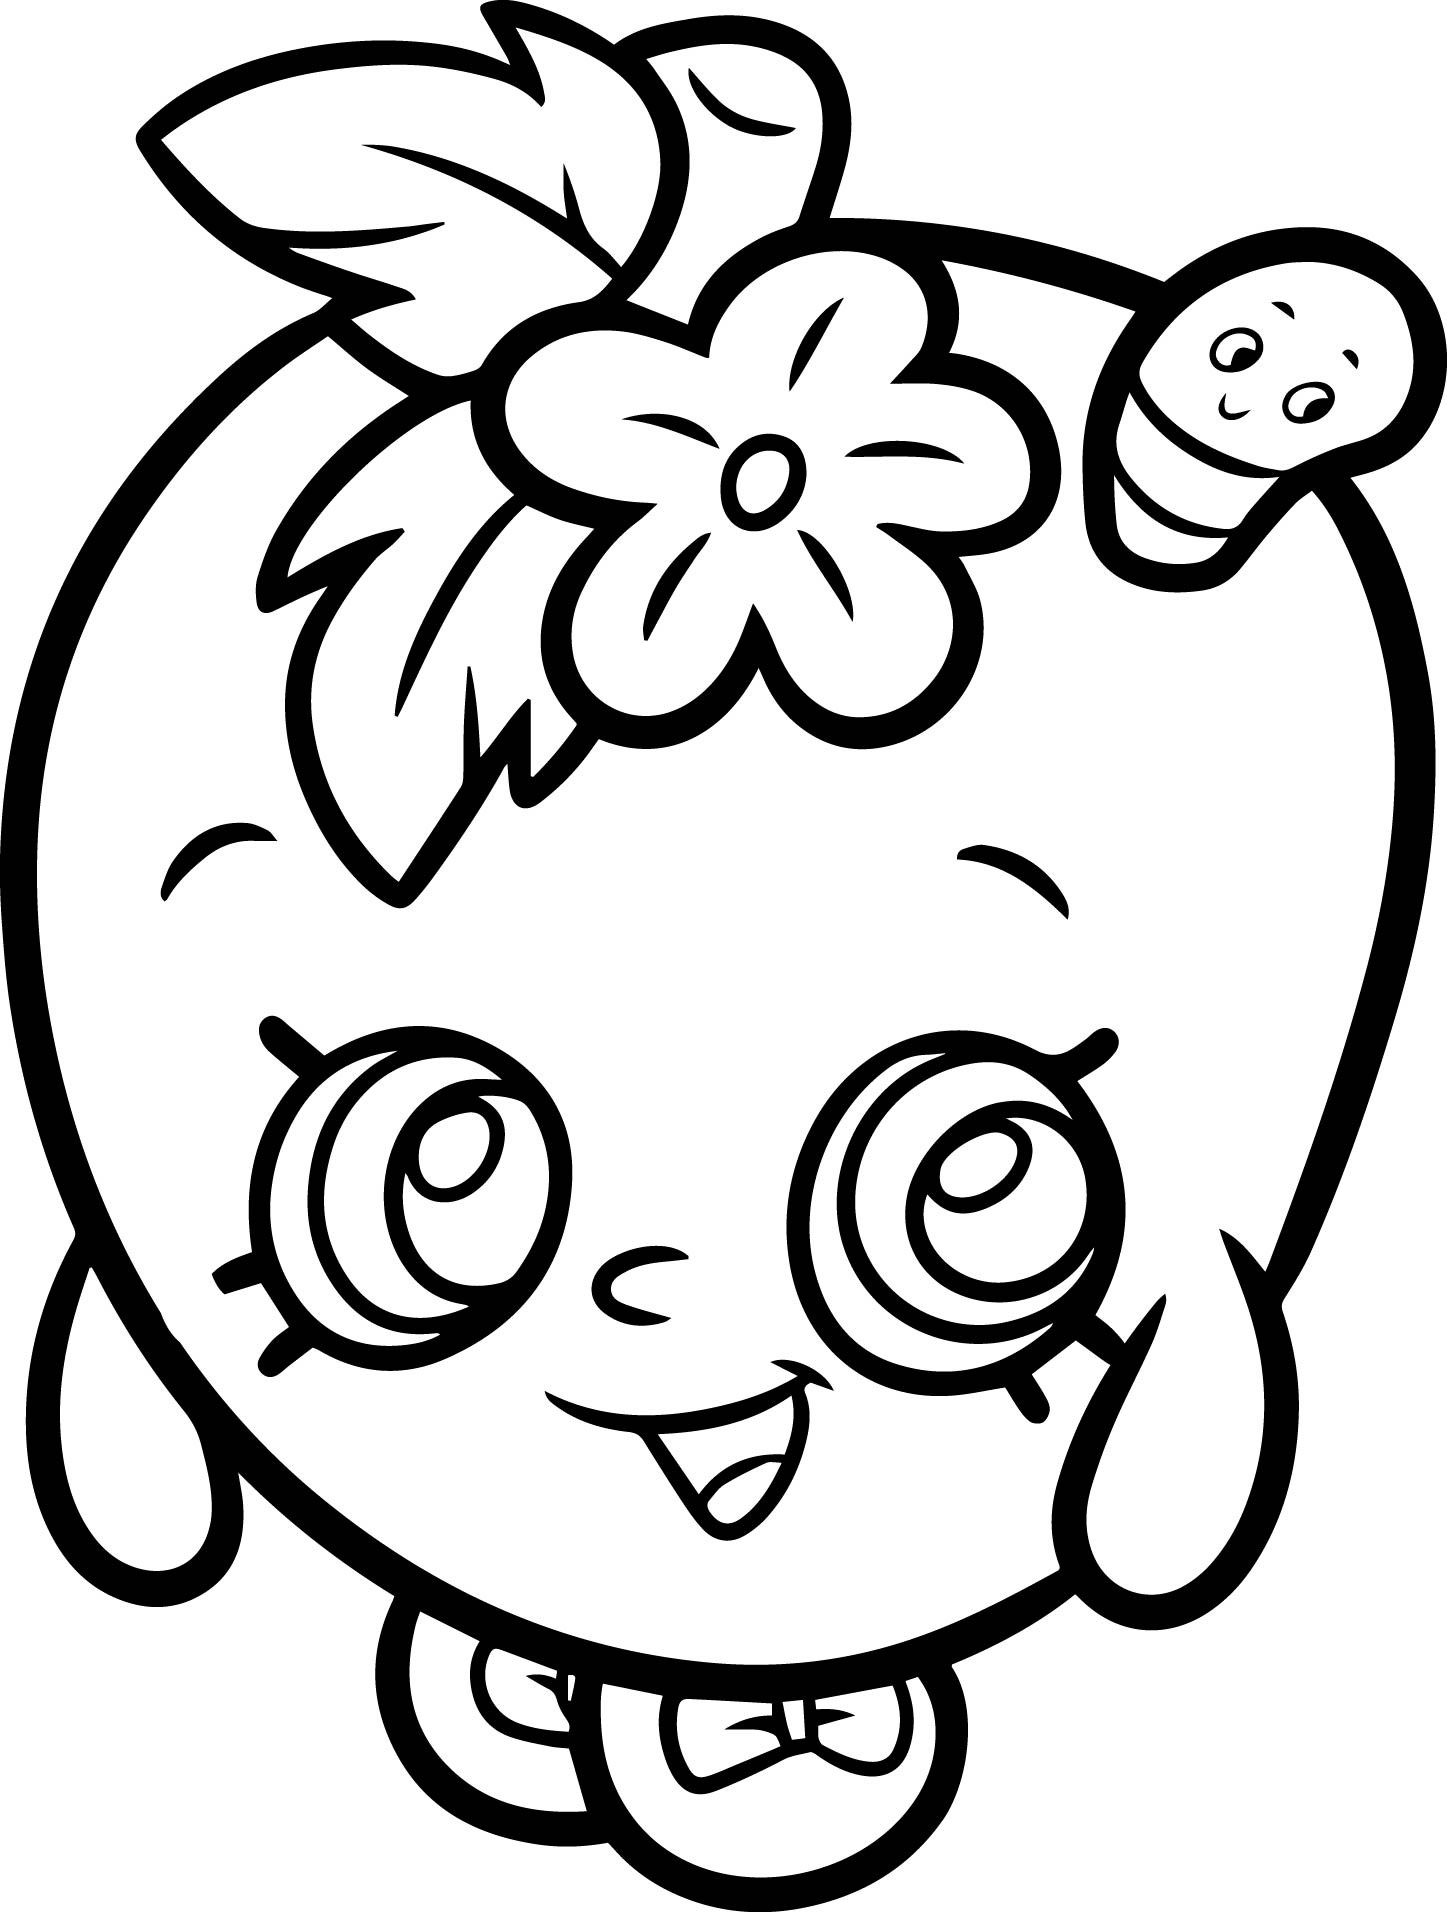 Download The Best Coloring Pages for Girls Shopkins Apple - Home ...